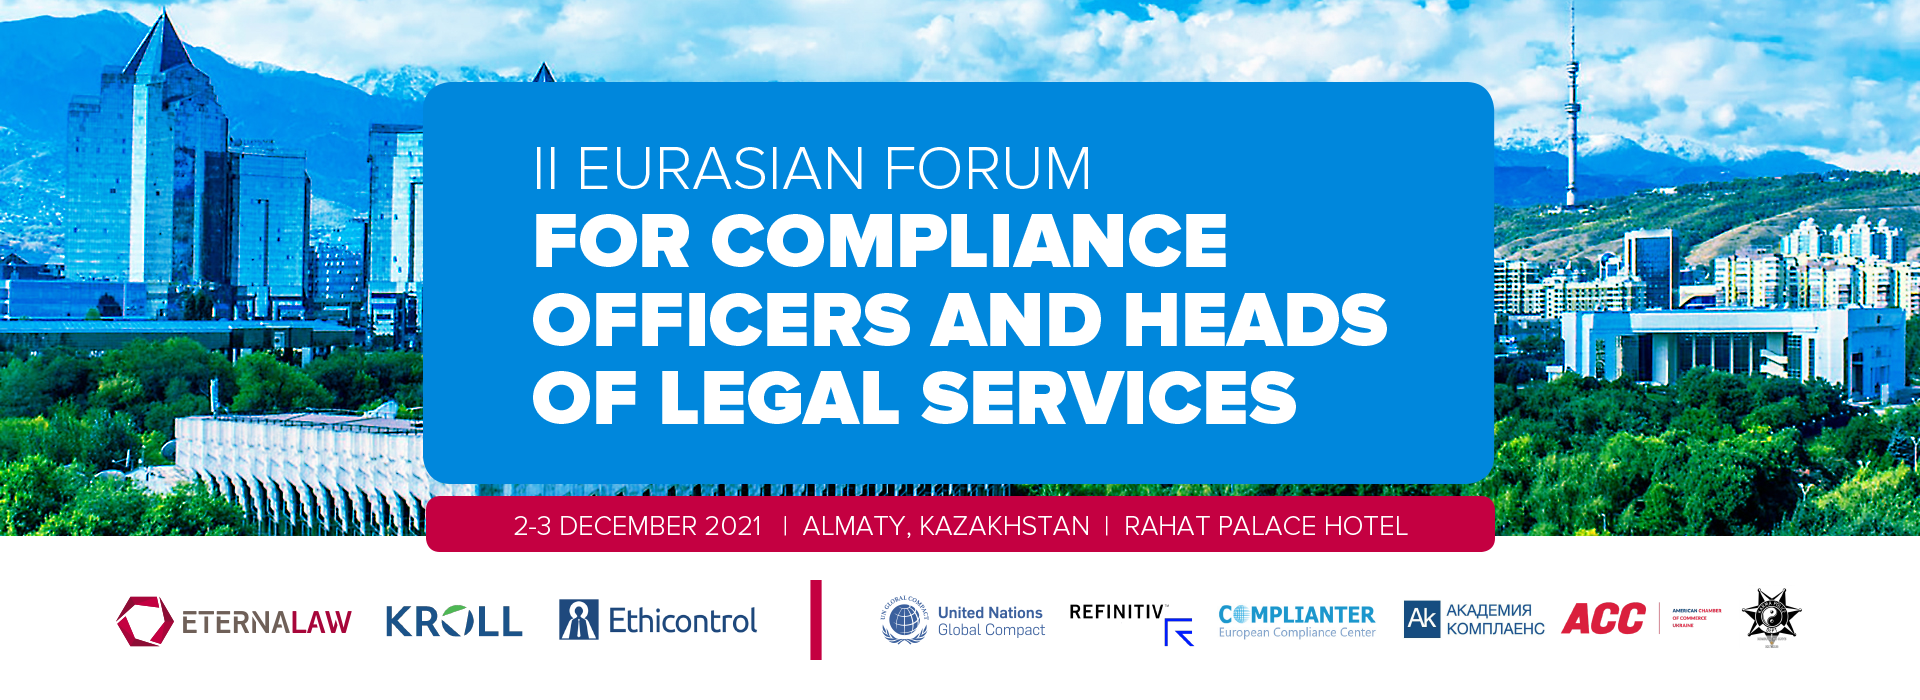 II Eurasian Forum for Compliance Officers and Heads of Legal Services